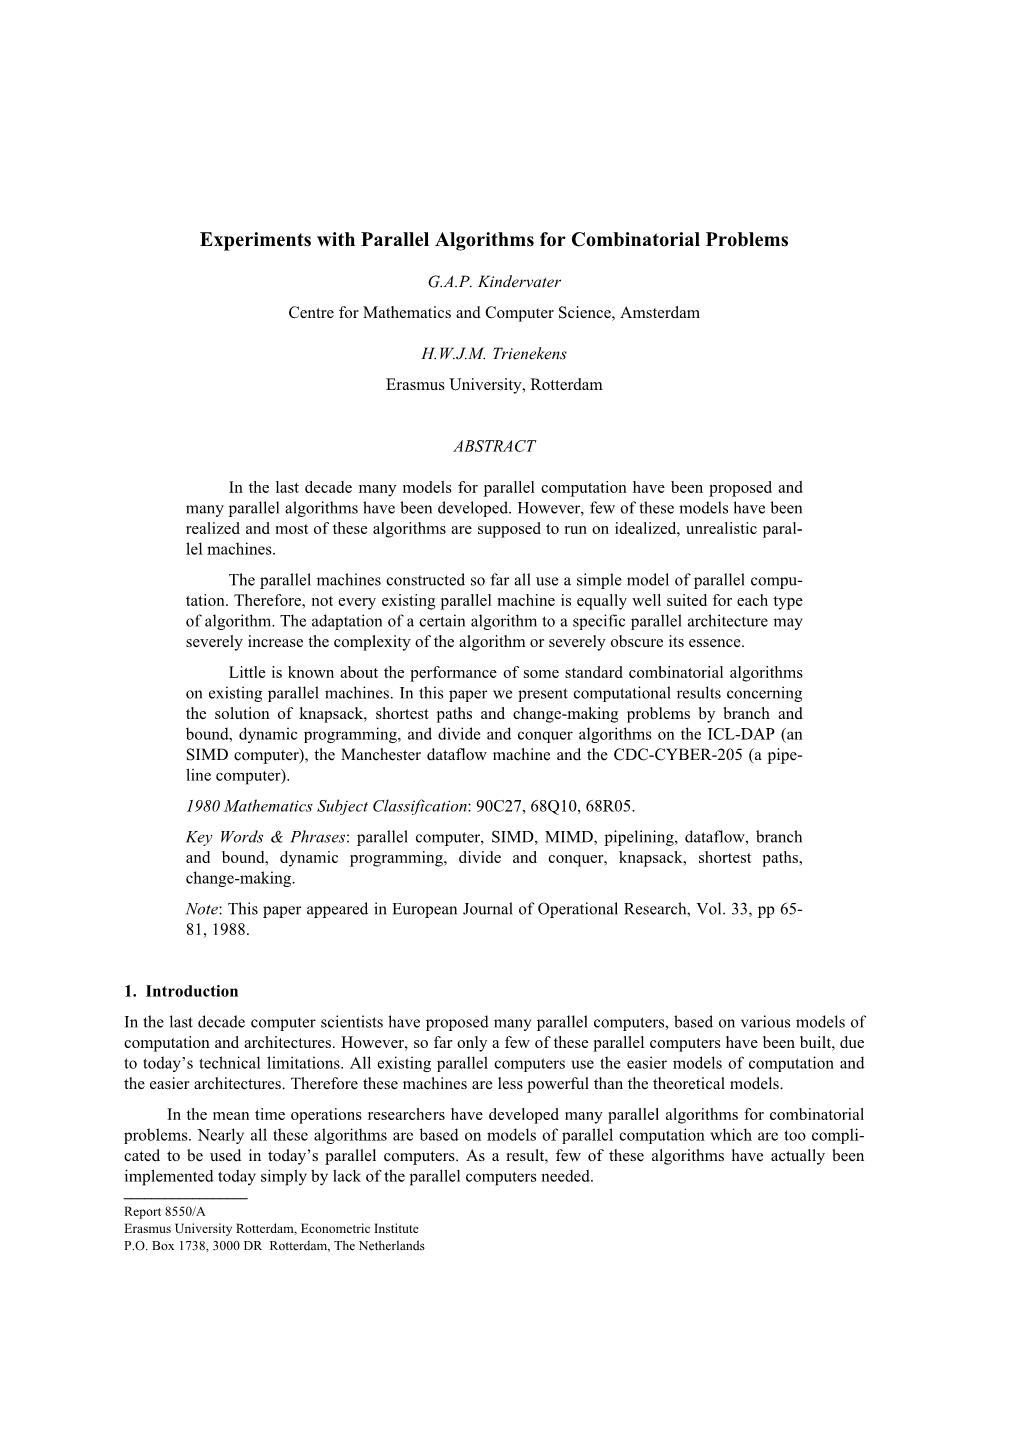 Experiments with Parallel Algorithms for Combinatorial Problems